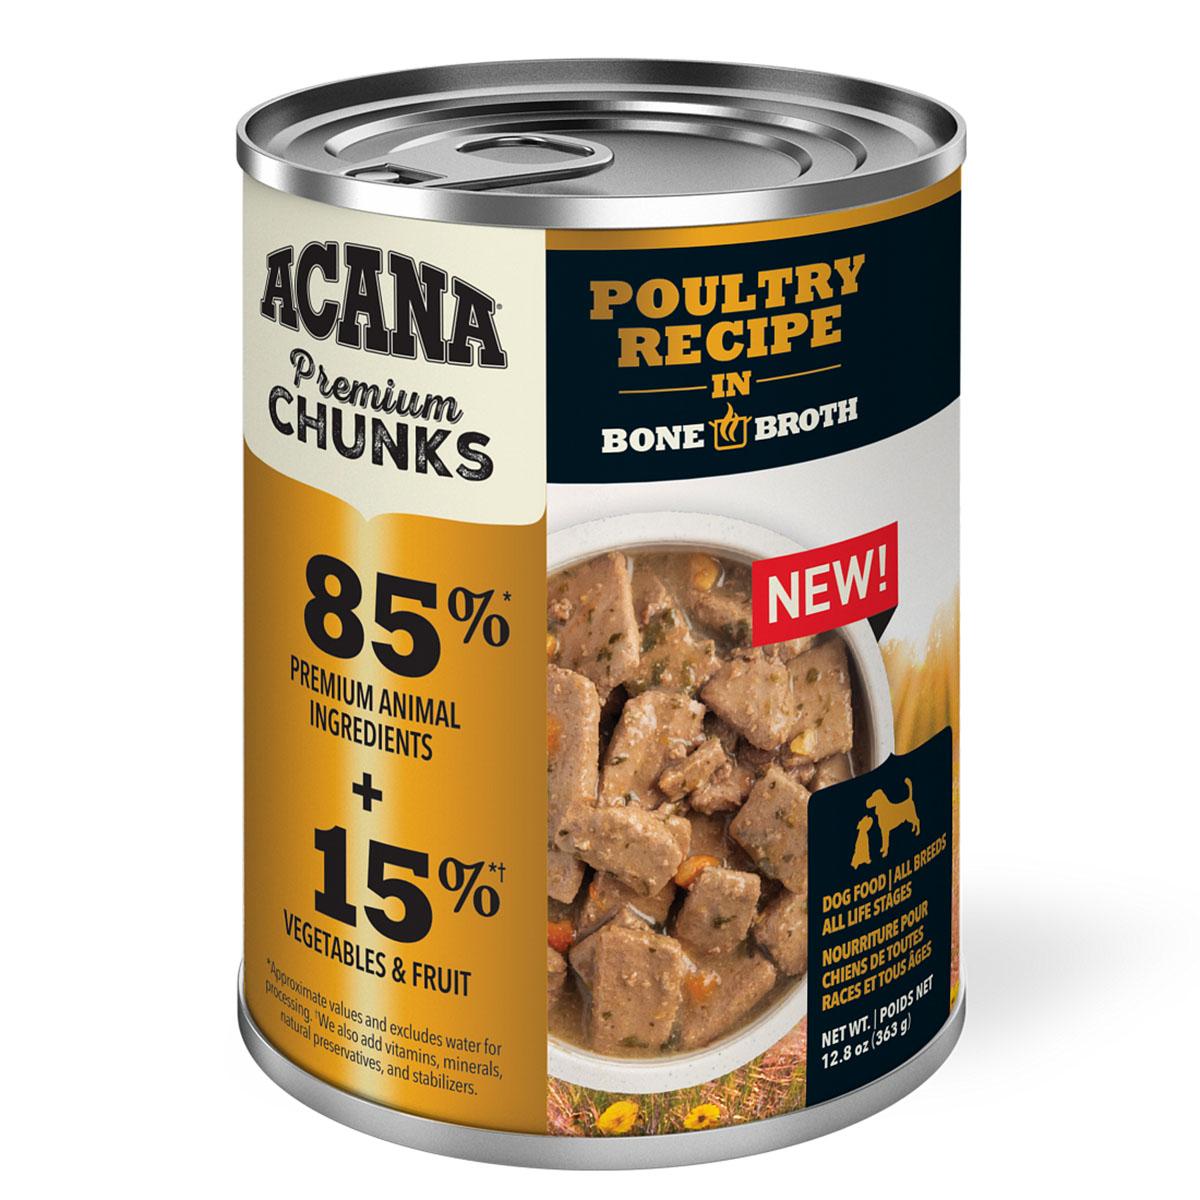 Acana Premium Chunks Poultry Recipe in Bone Broth Canned Dog Food